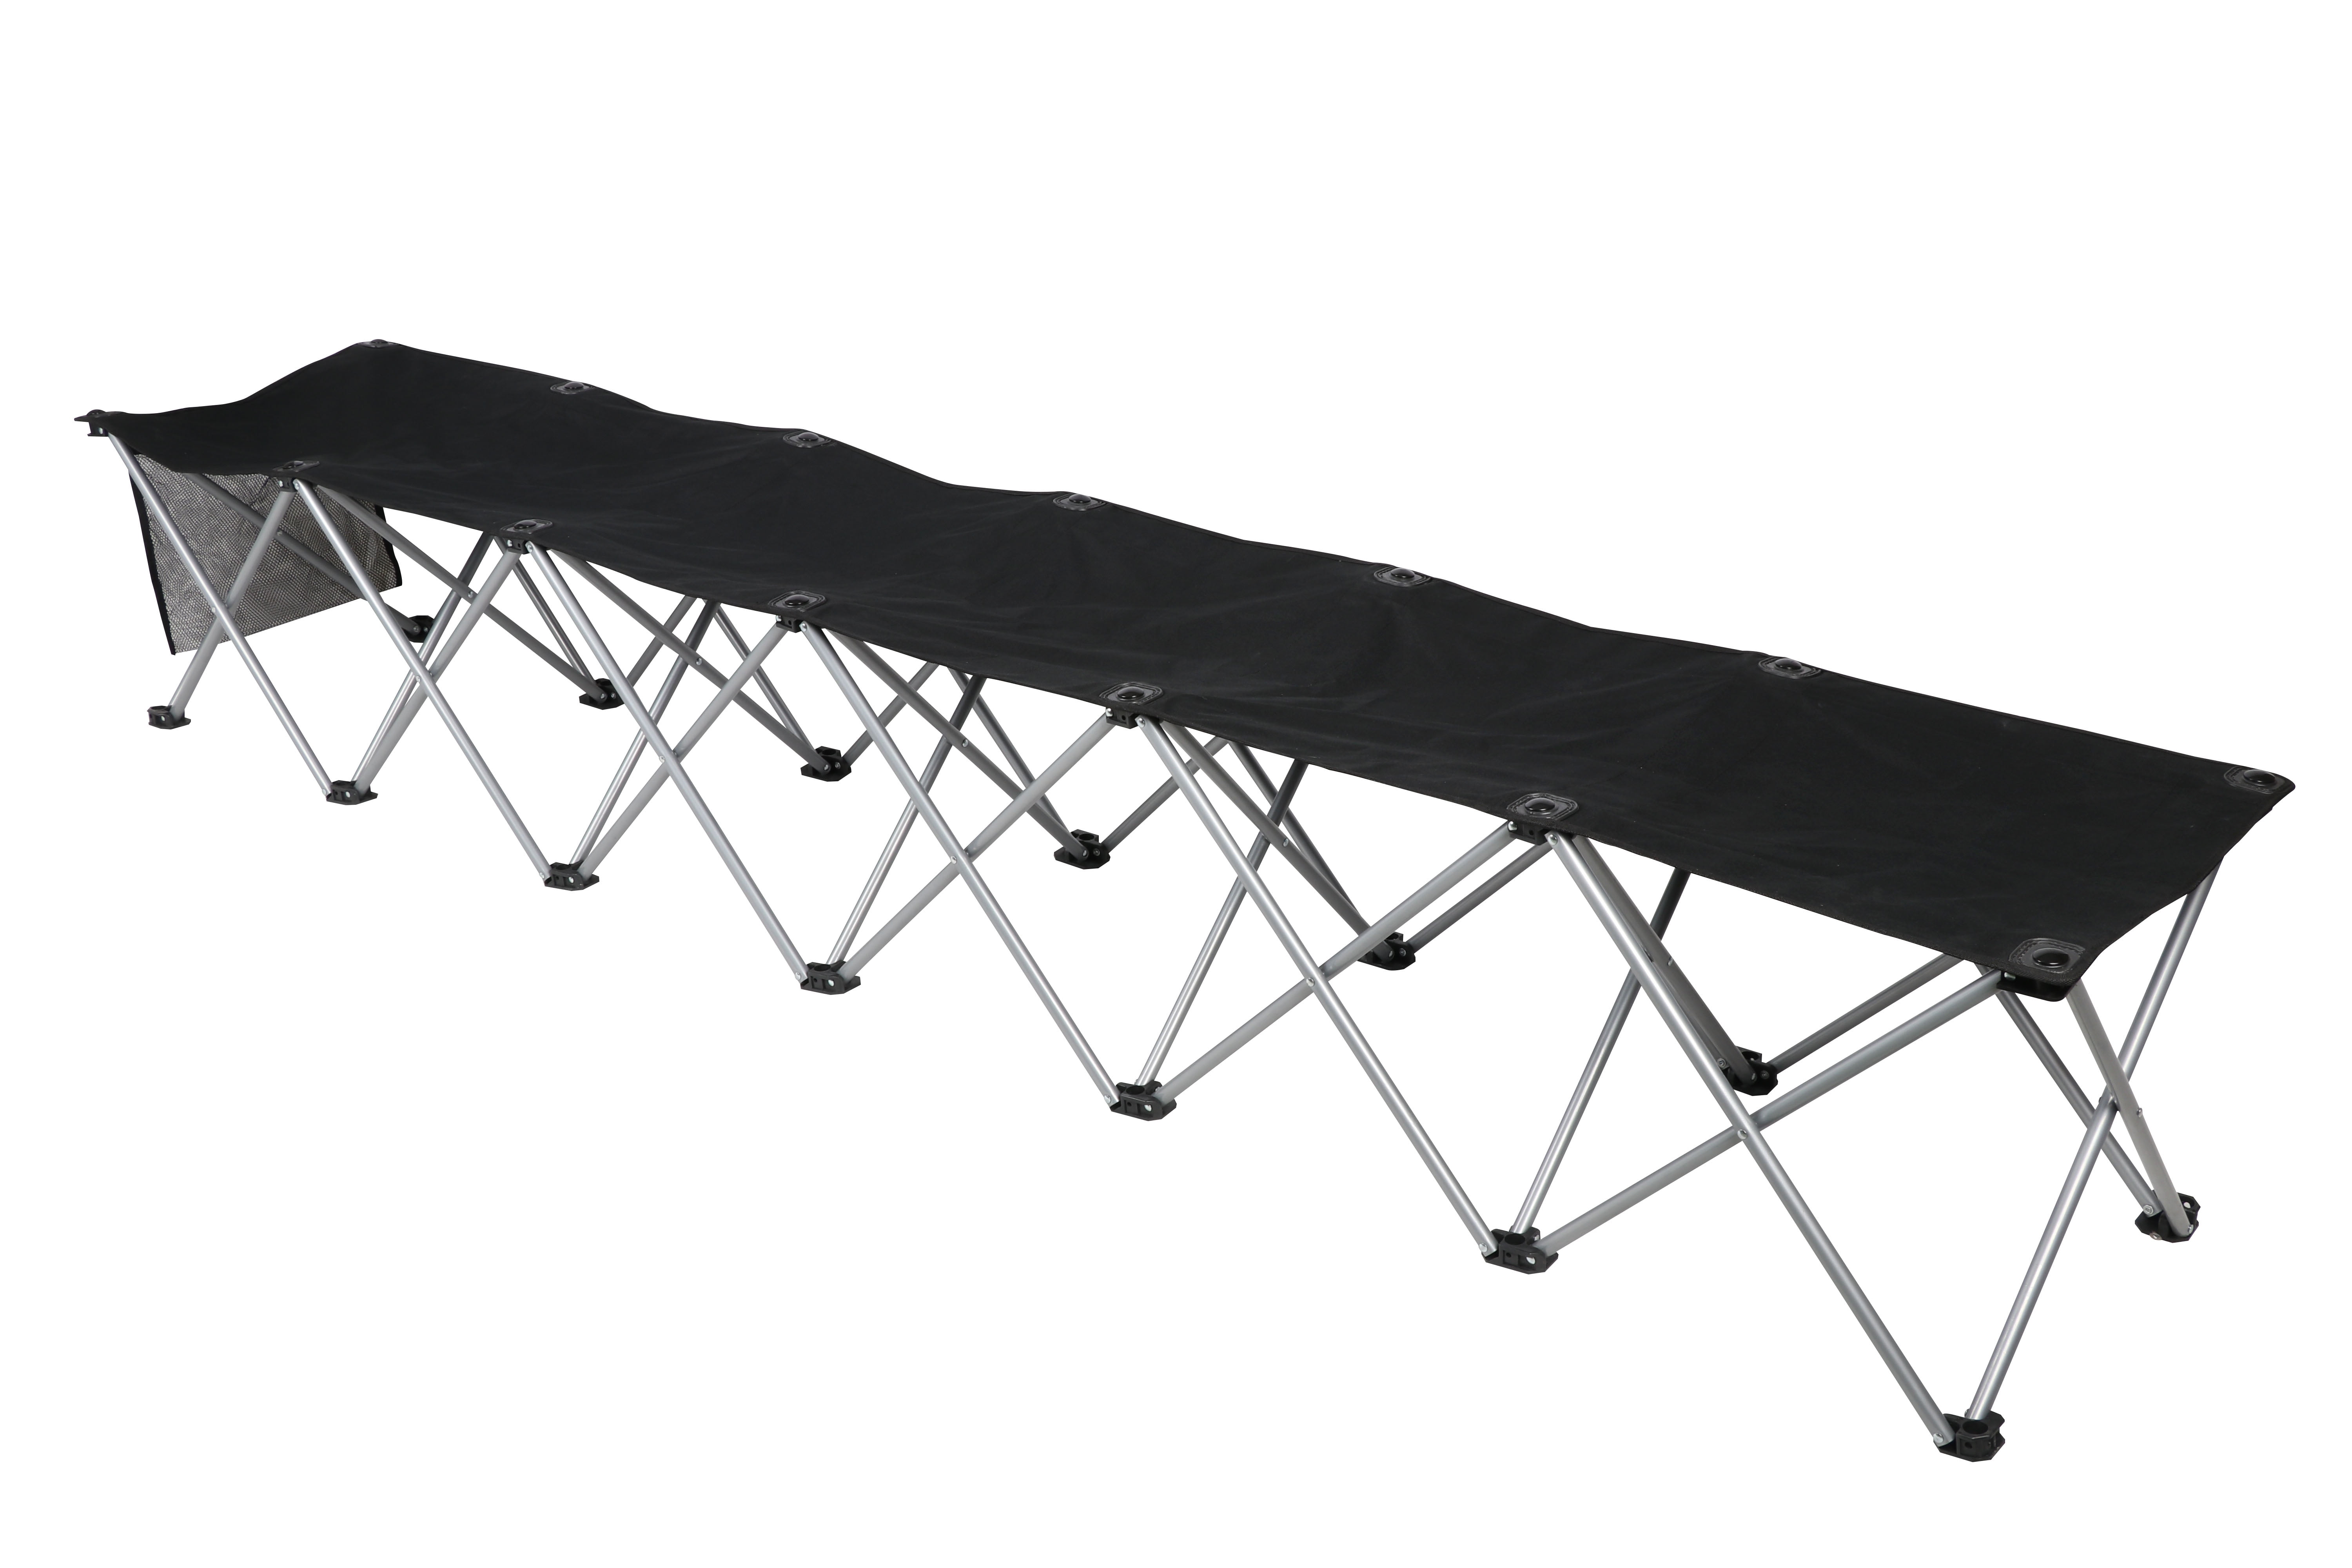 6 Seats Foldable Sideline Bench  Sports Team Camping Folding Bench Chairs Black 